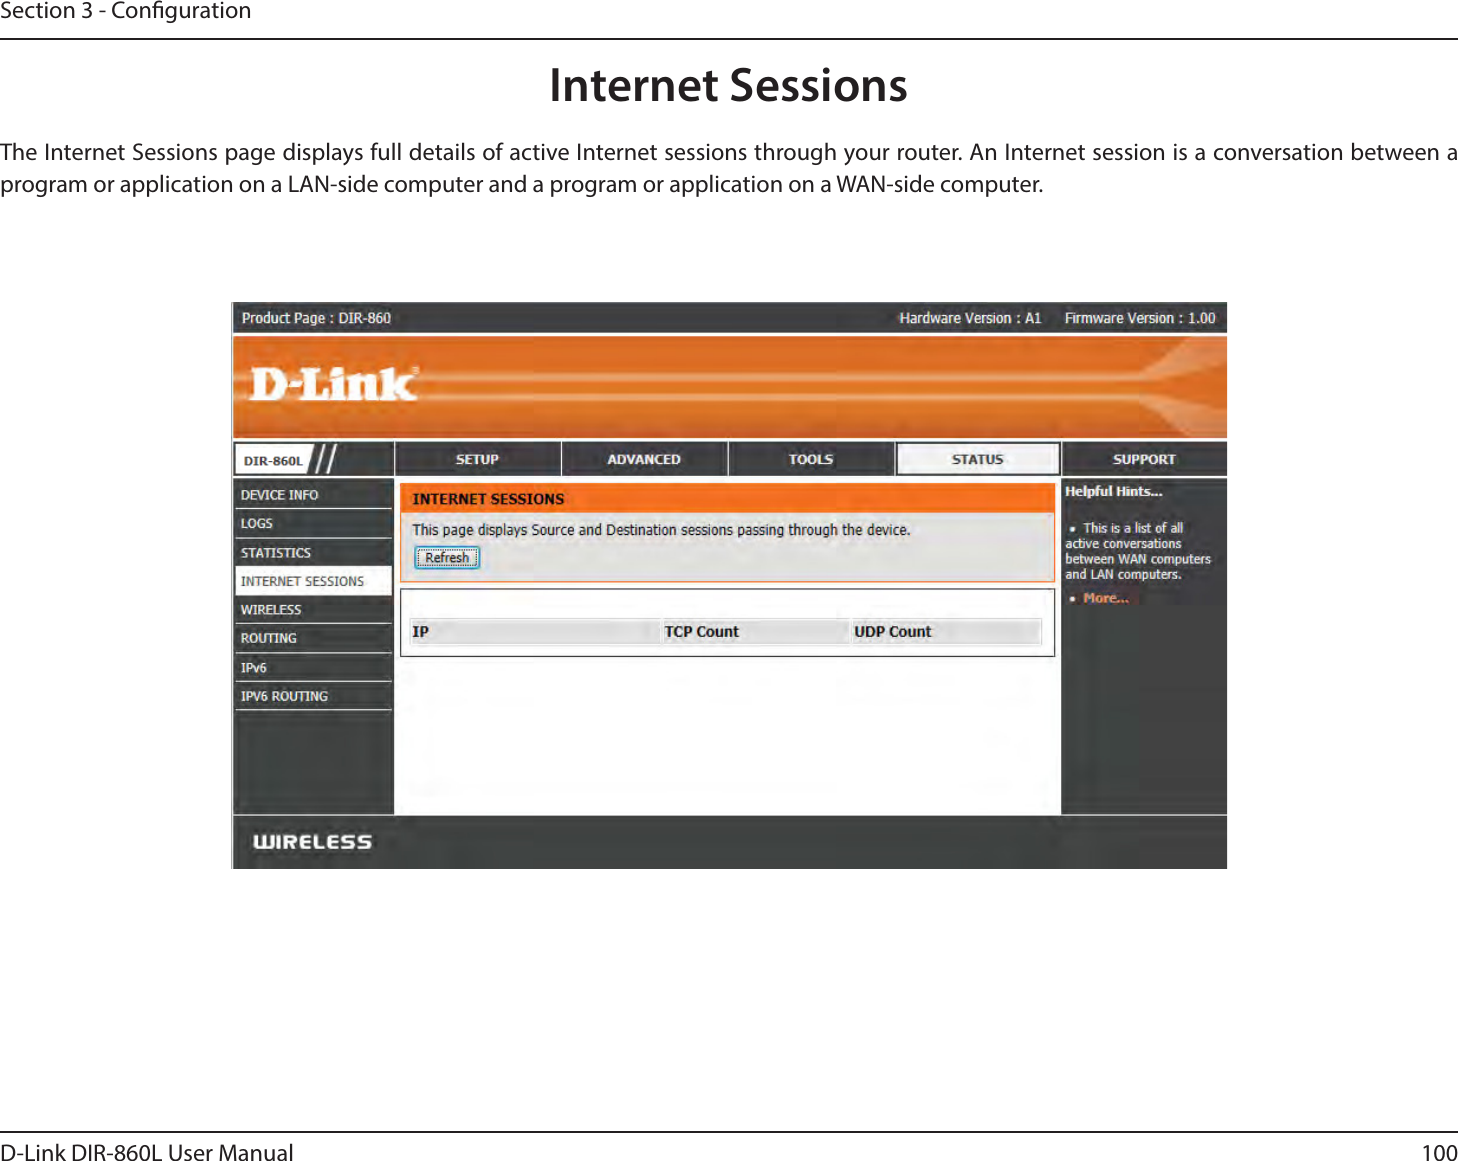 100D-Link DIR-860L User ManualSection 3 - CongurationInternet SessionsThe Internet Sessions page displays full details of active Internet sessions through your router. An Internet session is a conversation between a program or application on a LAN-side computer and a program or application on a WAN-side computer. 